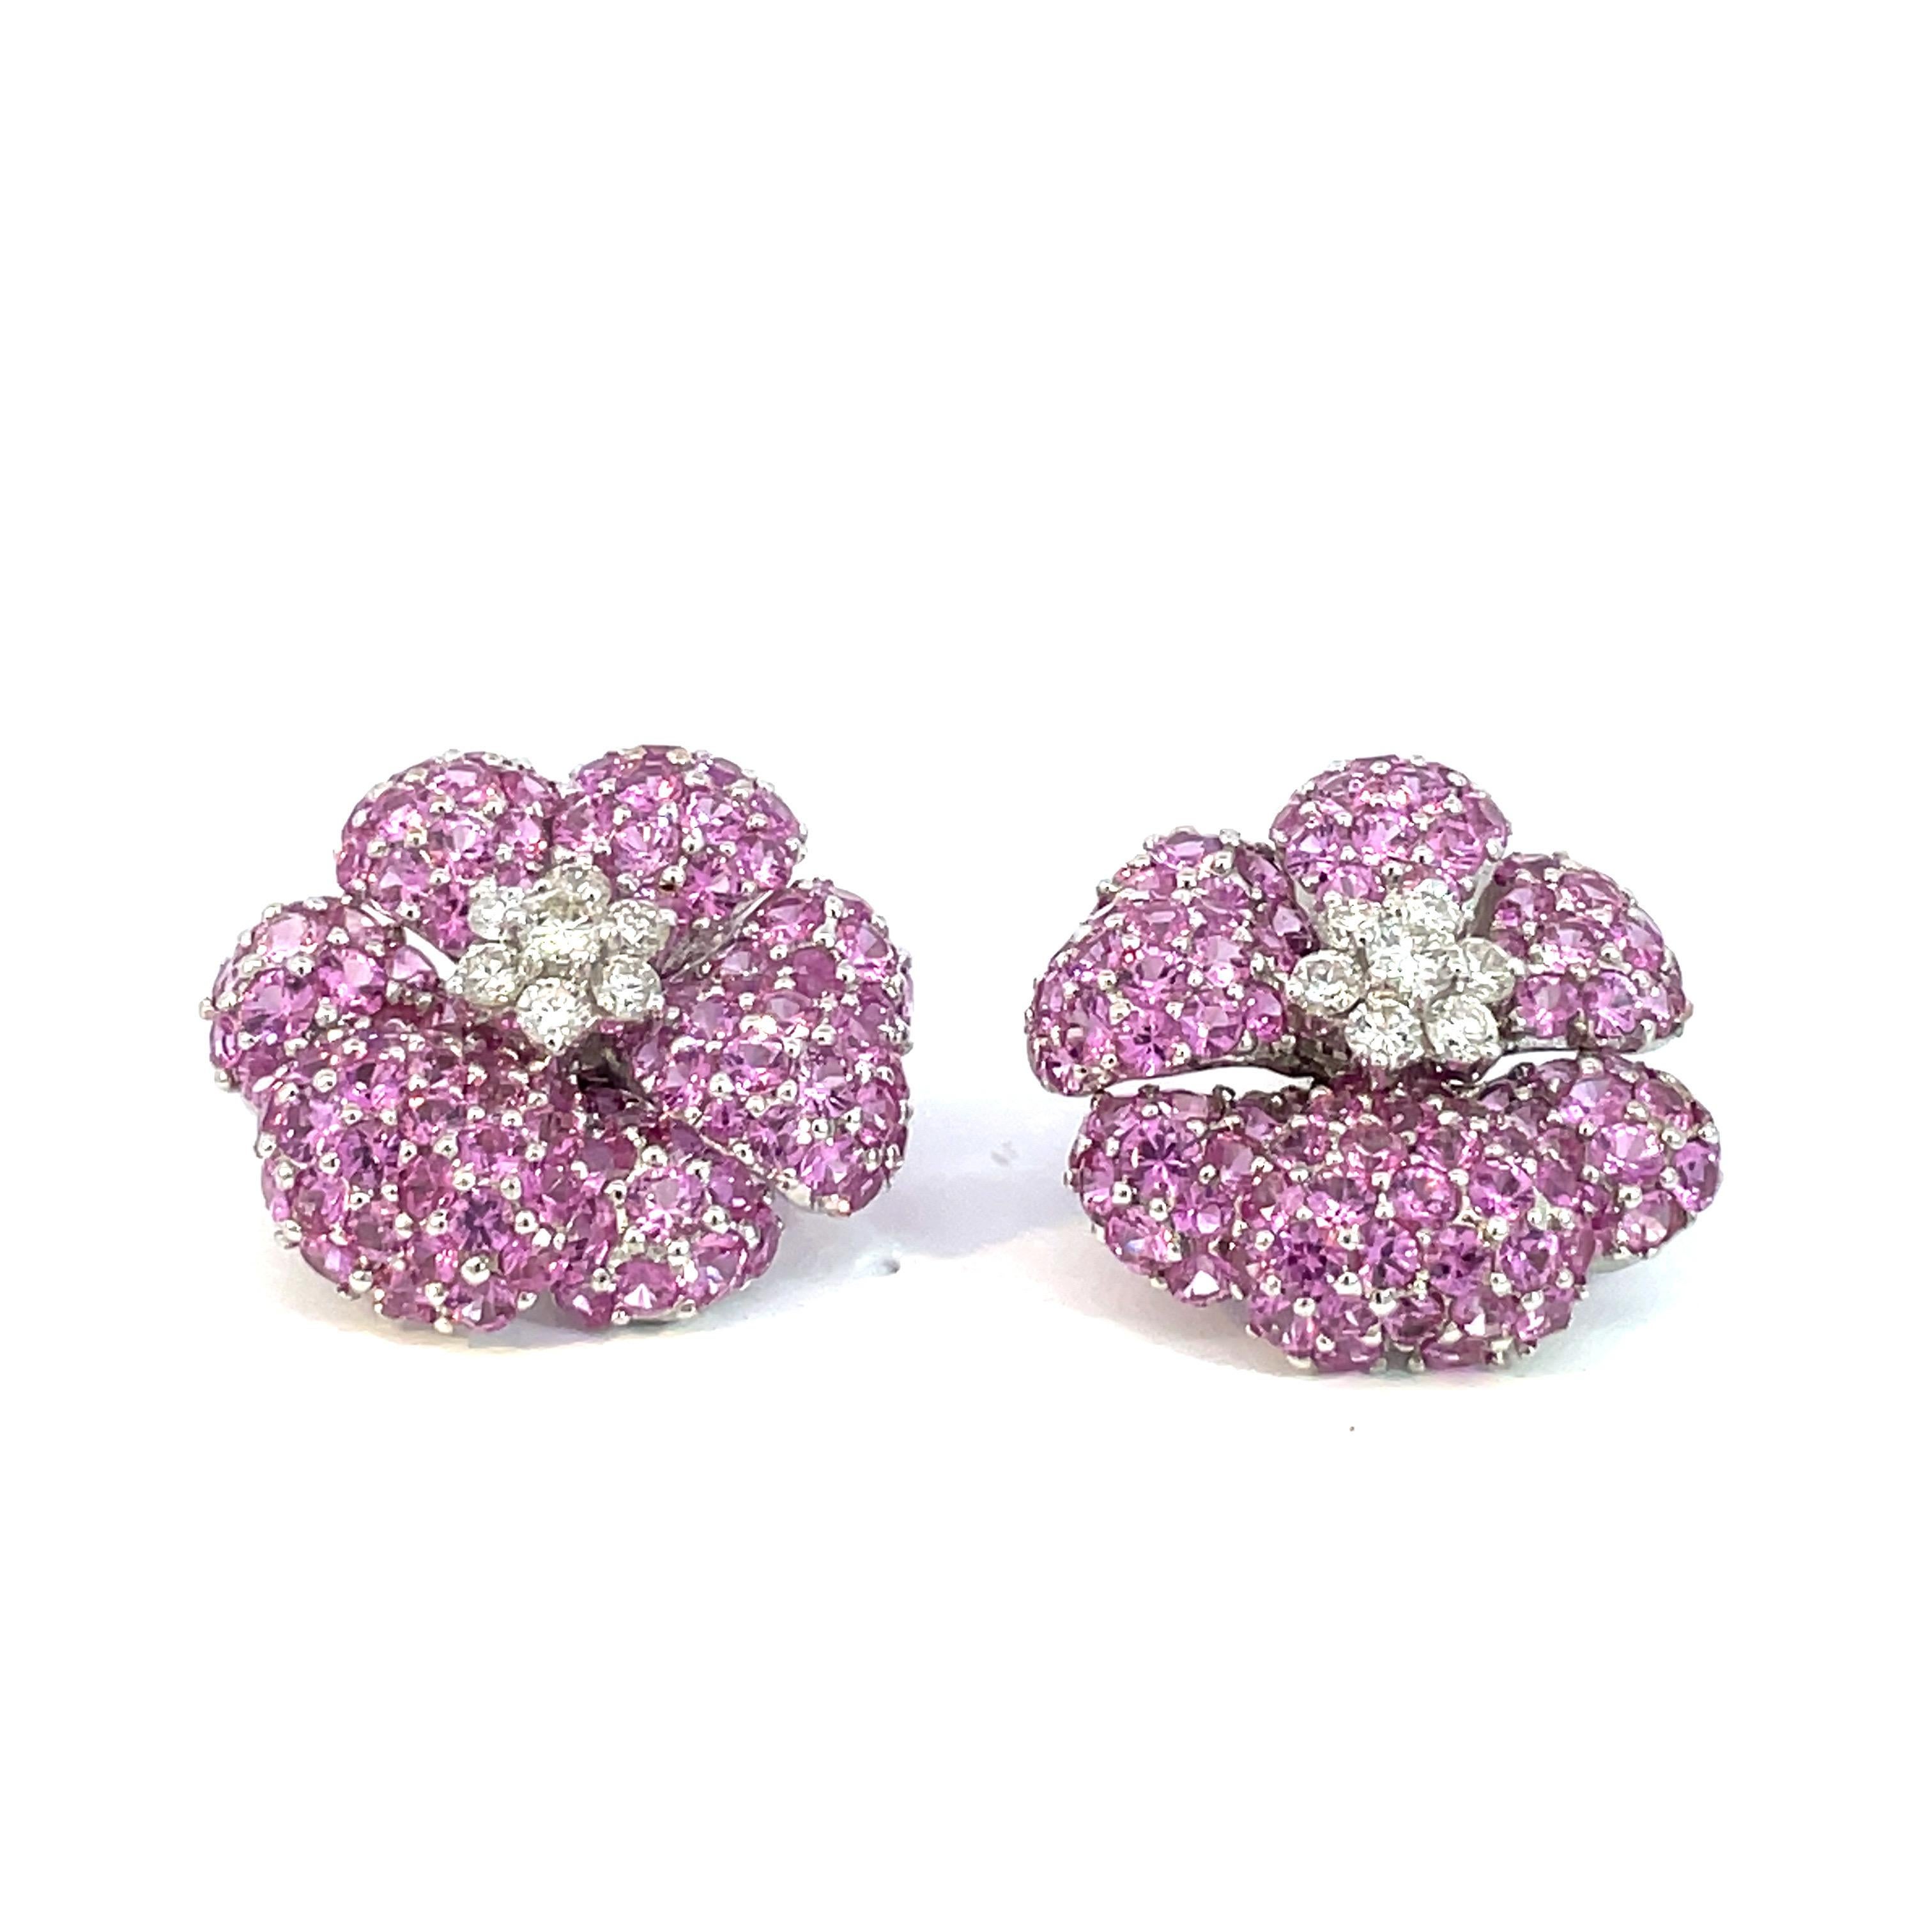 A large pair of multi petal flower earrings set with natural pink sapphire and natural diamonds in 18kt white gold with a collapsable  post and clip system. 

14 Brilliant cut natural diamonds weighing 1.02ct total weight, quality G/VS

220 Natural